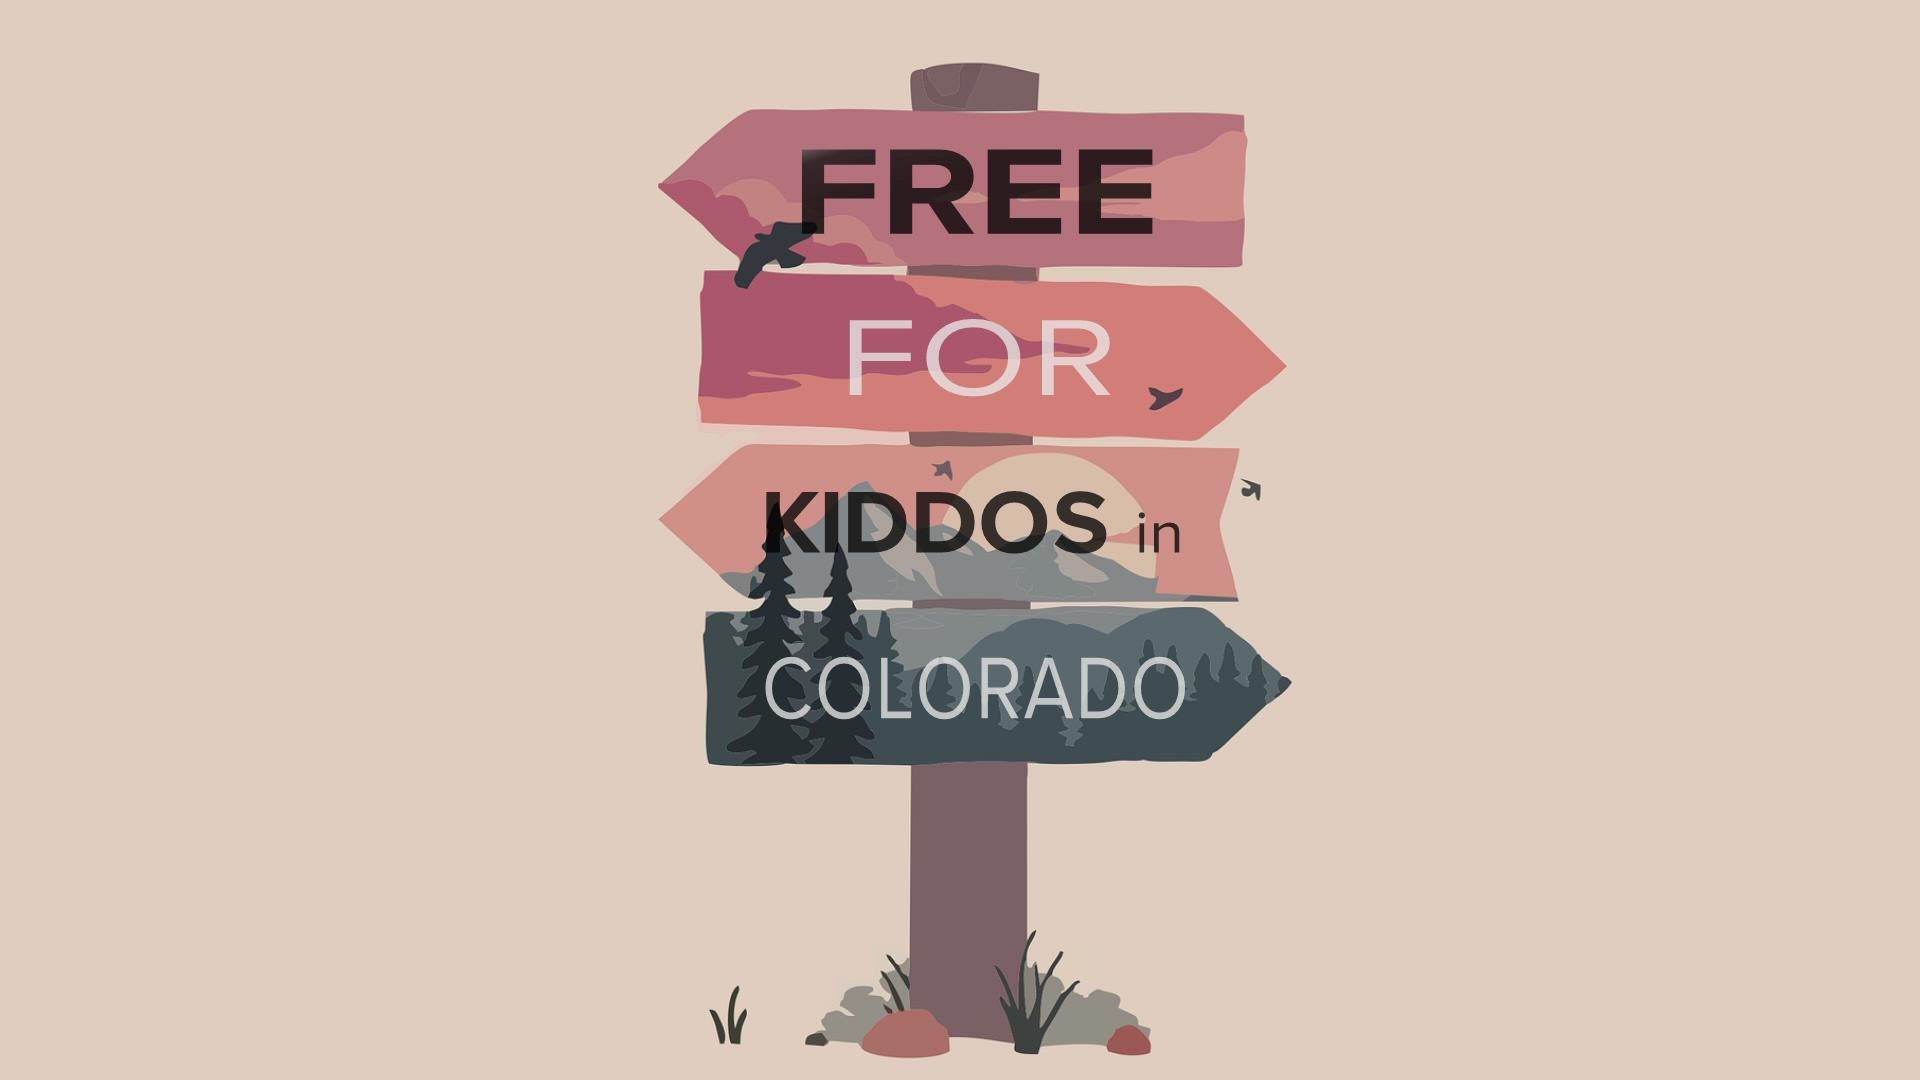 Here are some free things that are family-friendly to do in Colorado this weekend.